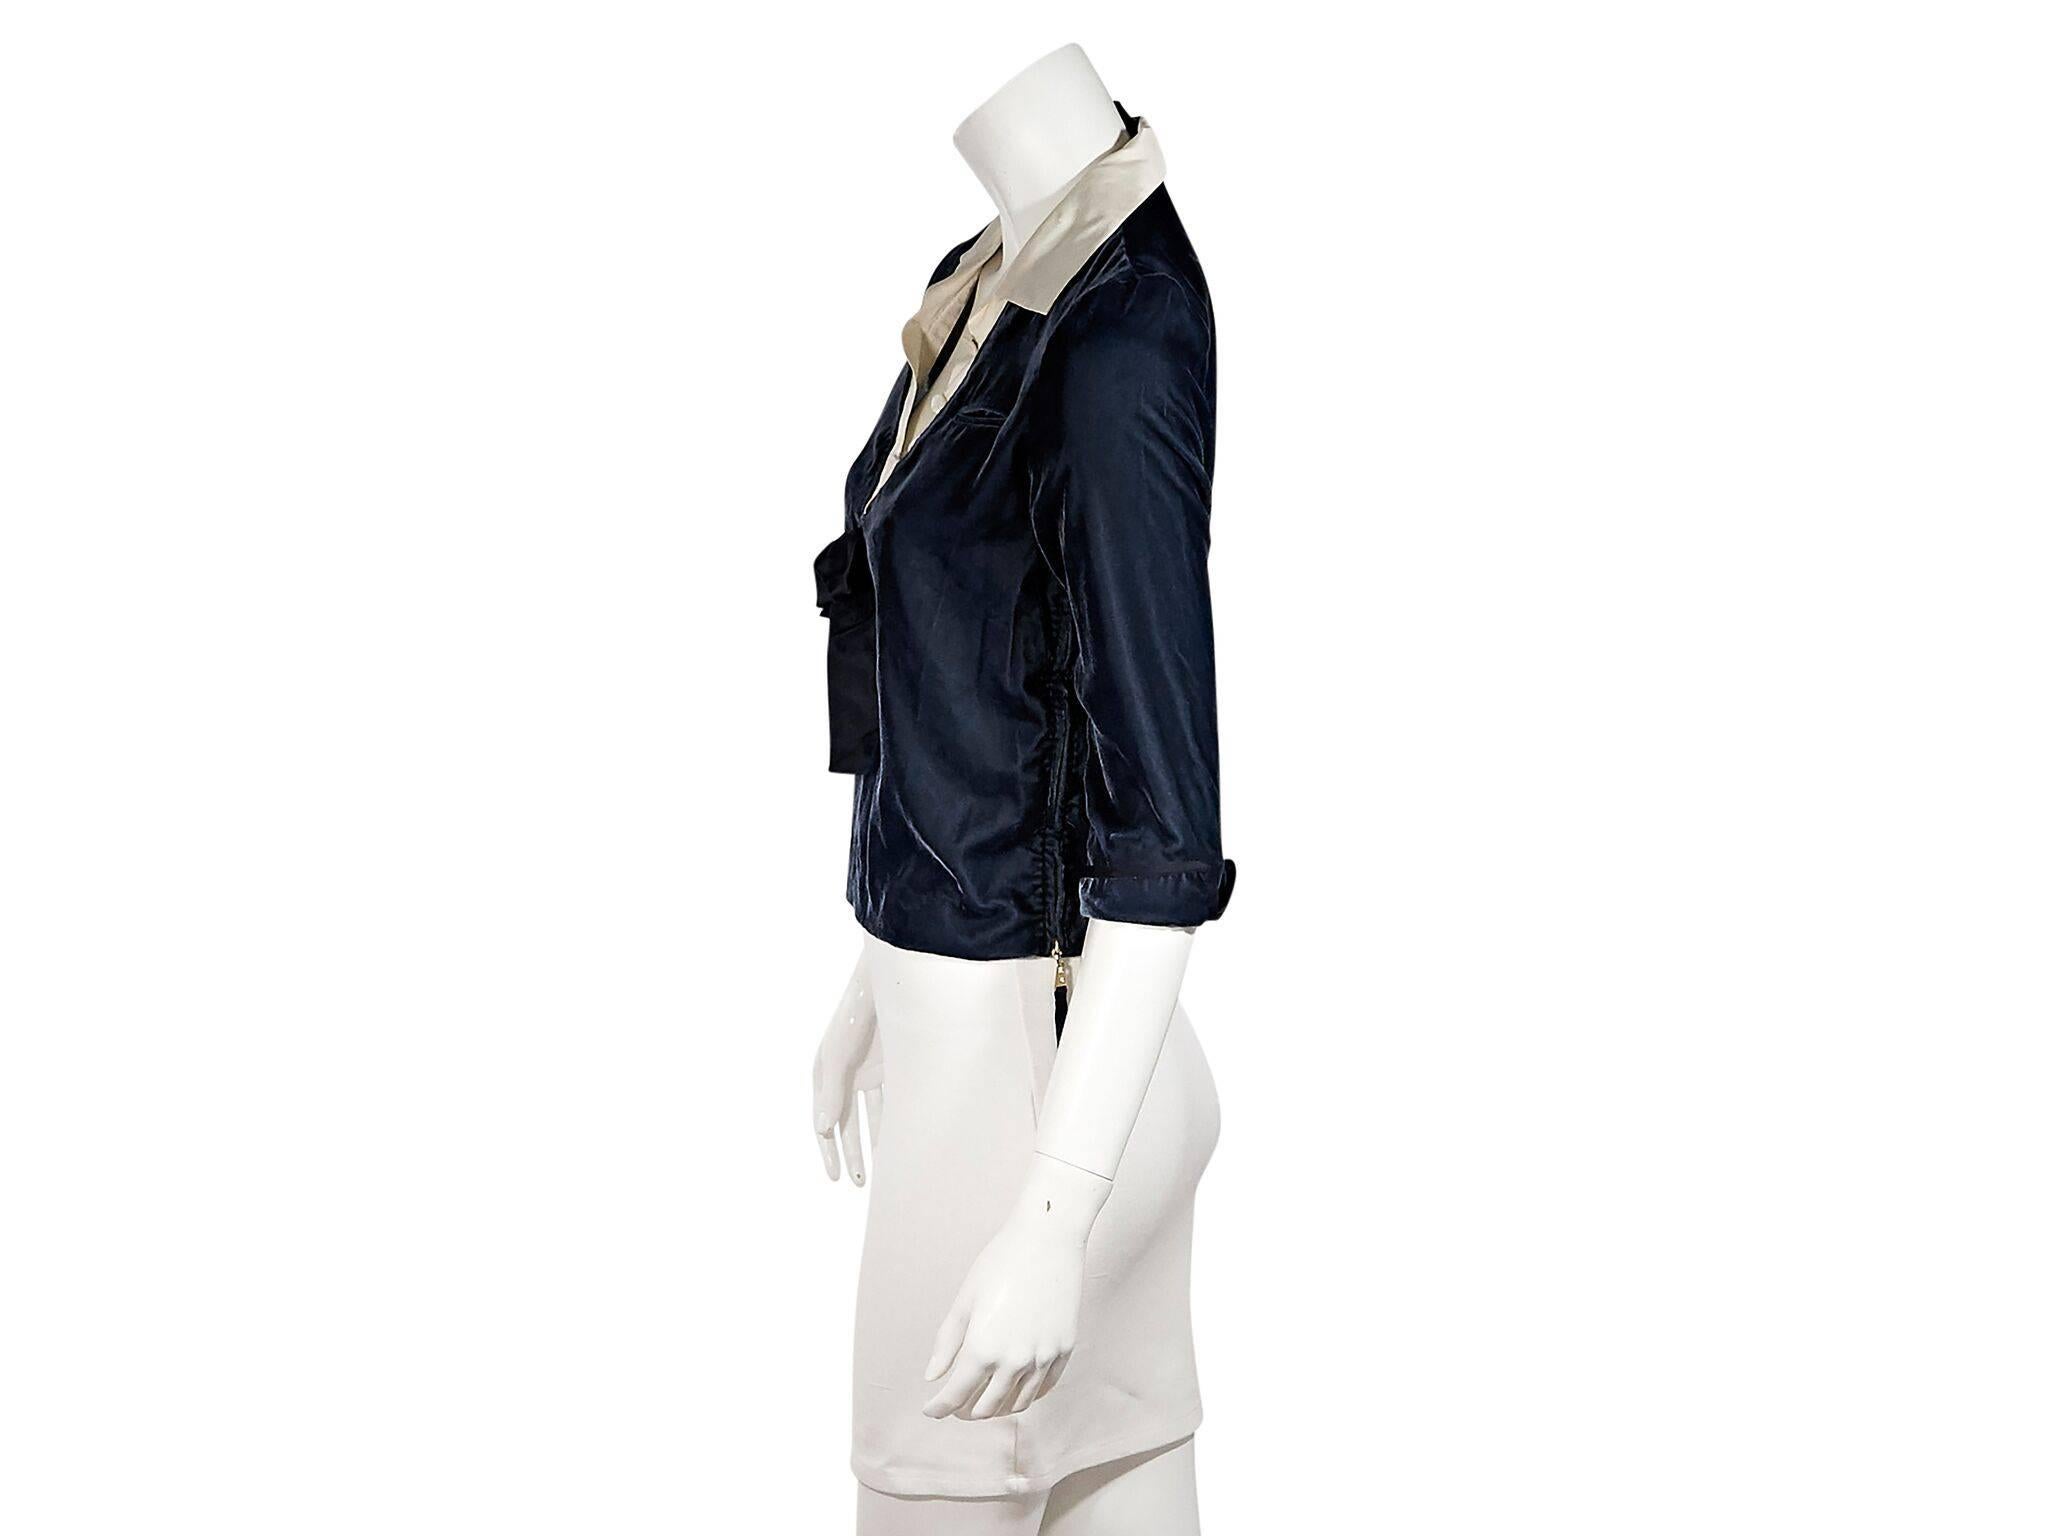 Product details:  Blue velvet top by Louis Vuitton.  Cream silk spread collar.  Button placket.  Elbow-length sleeves.  Rolle cuffs.  Besom chest pocket.  Side zipper details.  Pullover style.  36